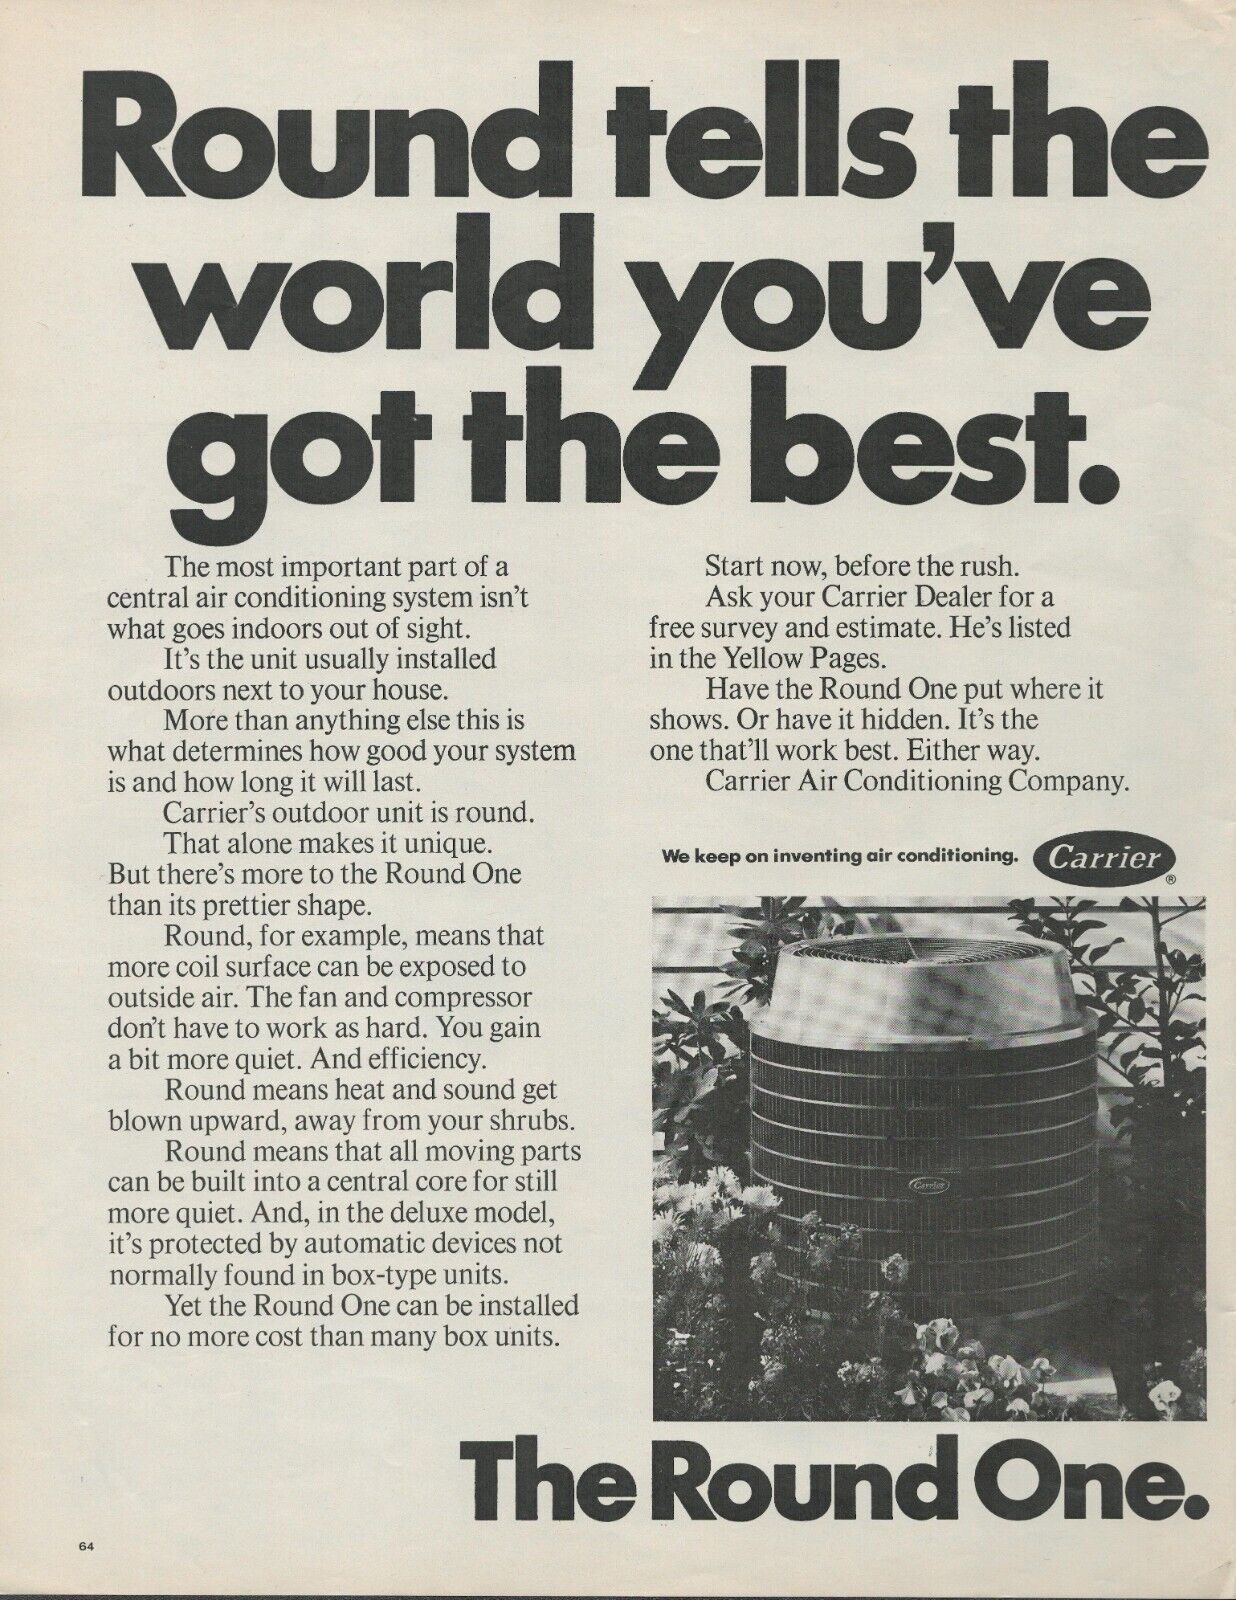 1971 Carrier Central Air Conditioning System Round Tells The World Best Print Ad